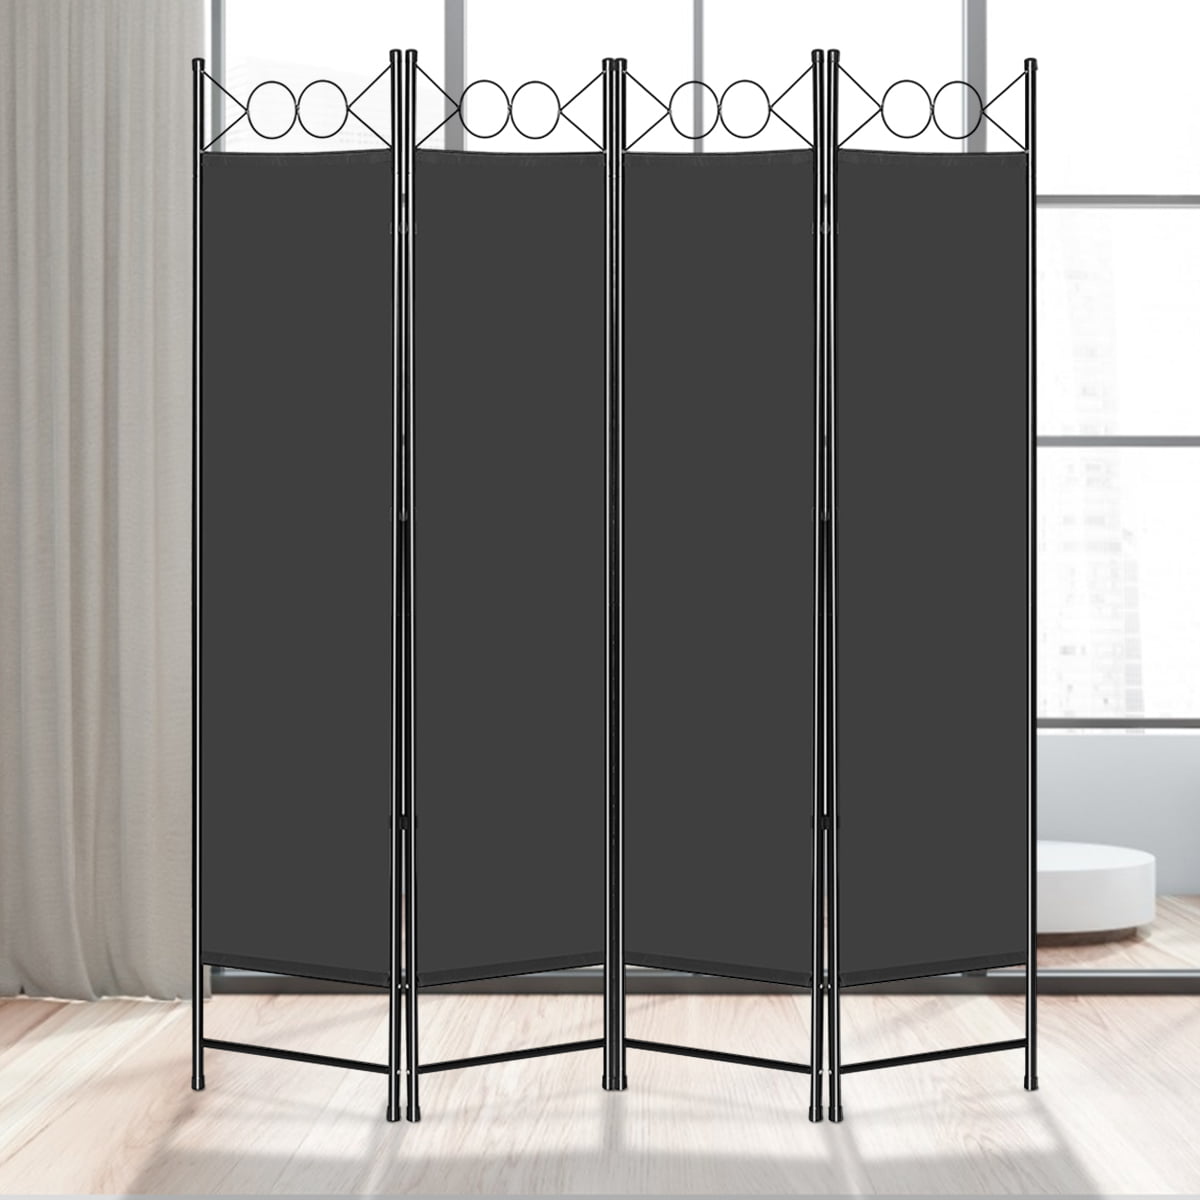 Room Divider Screen 4 Panel Indoor Home &Office Privacy Protection Screen Black 